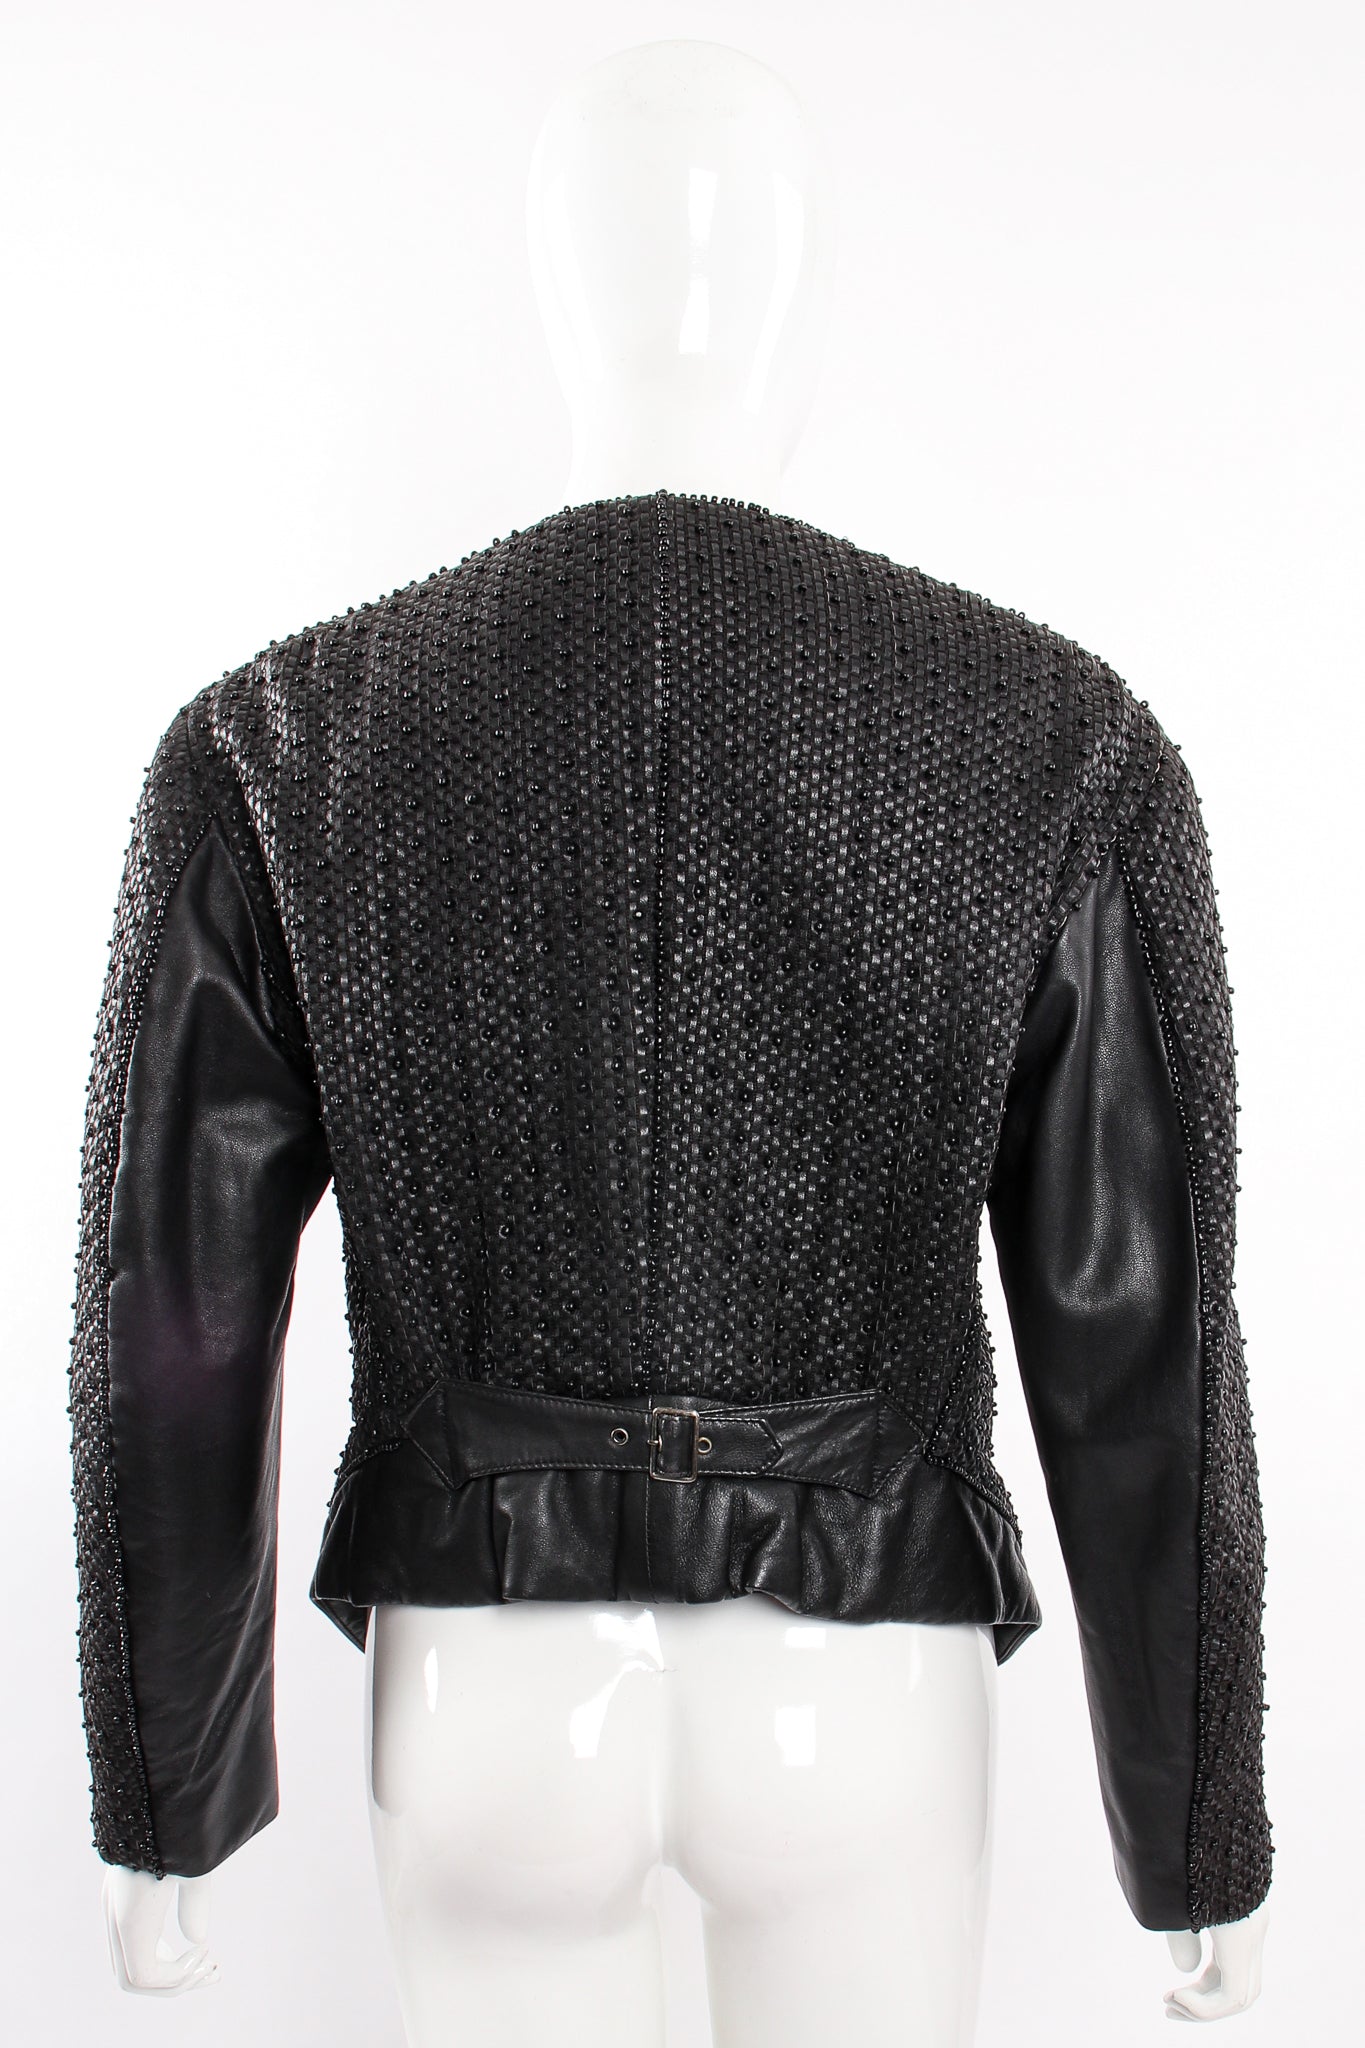 Vintage Issey Miyake Beaded Woven Leather Jacket on Mannequin back at Recess Los Angeles